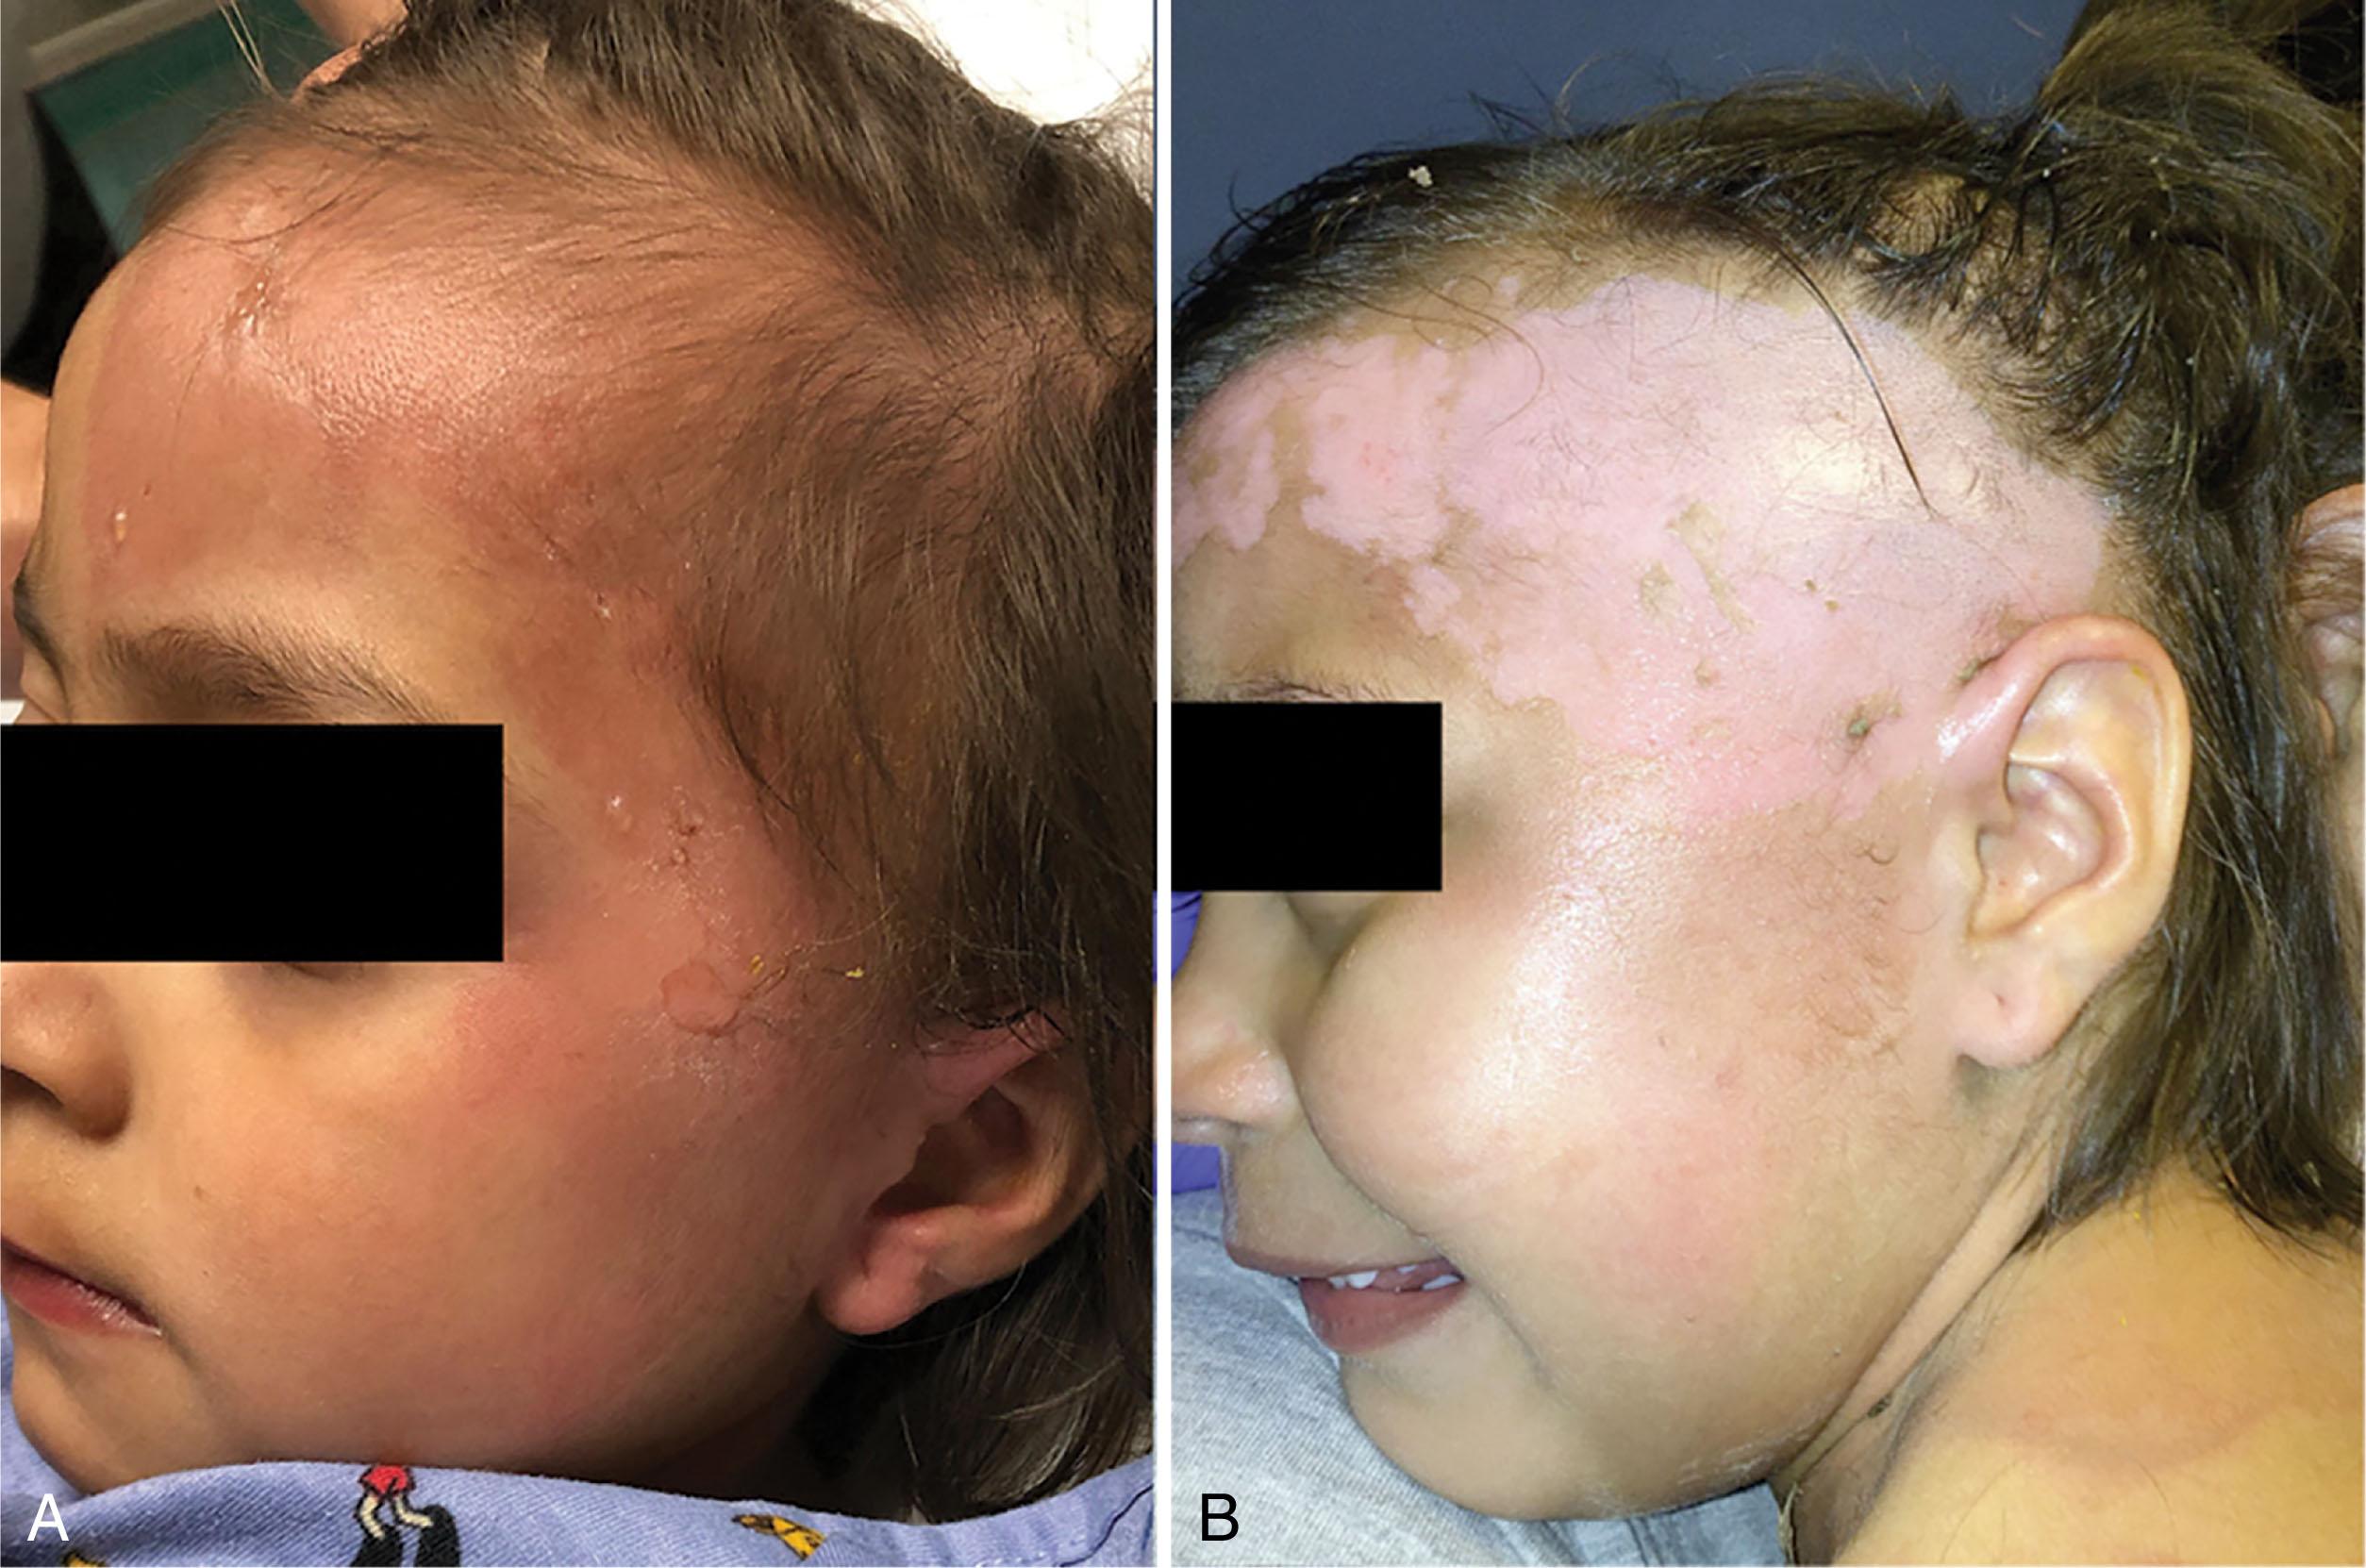 Figure 21.2, Cleansing and exposing the burn wound. Prior to assessment (A) the extent of skin injury can be underestimated, particularly in burns that extend into the hairline (B) .